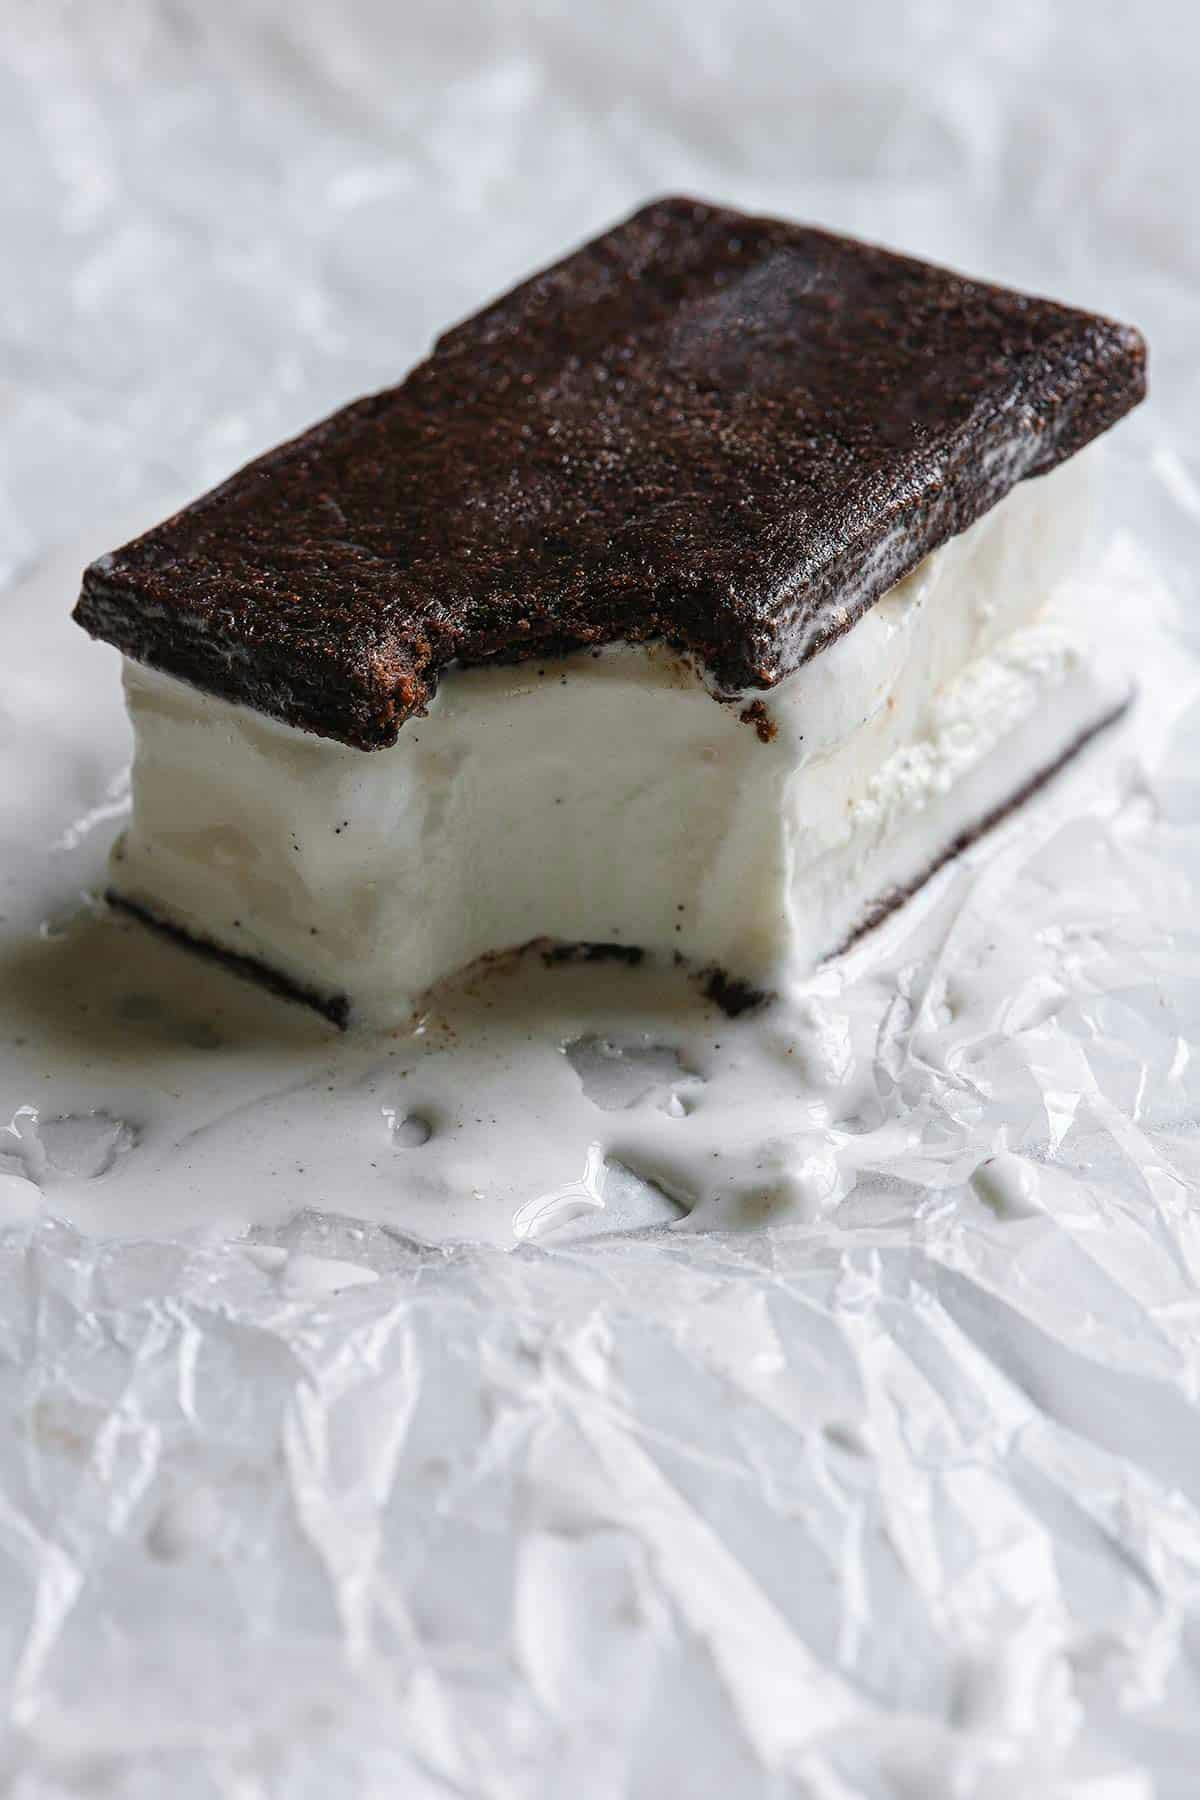 ice cream sandwich with a bite taken from it